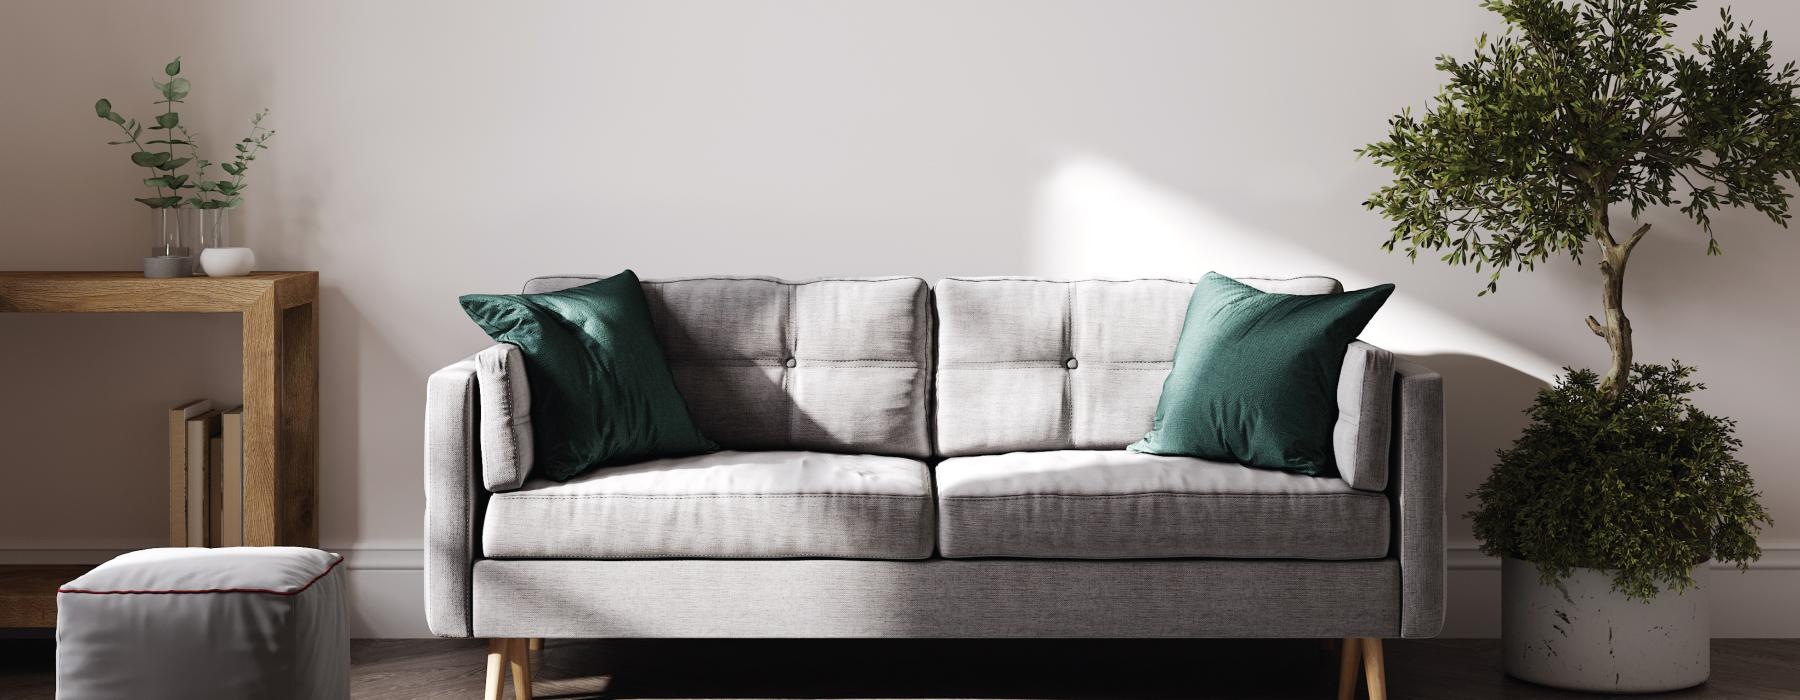 a couch with pillows and a plant